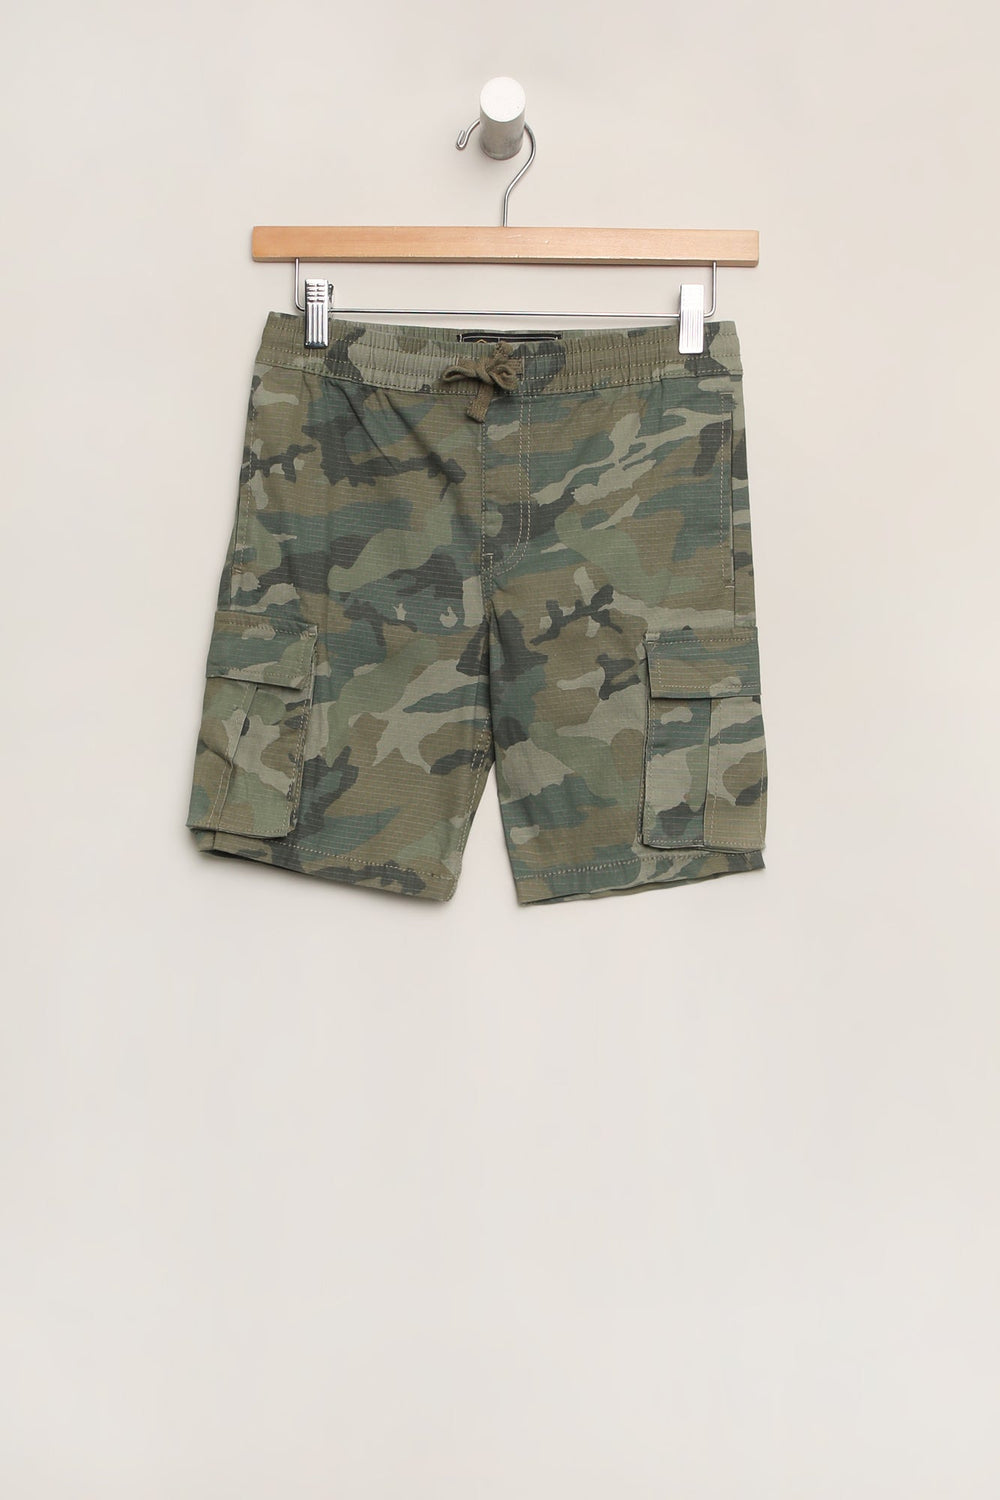 West49 Youth Camo Cargo Jogger Short West49 Youth Camo Cargo Jogger Short